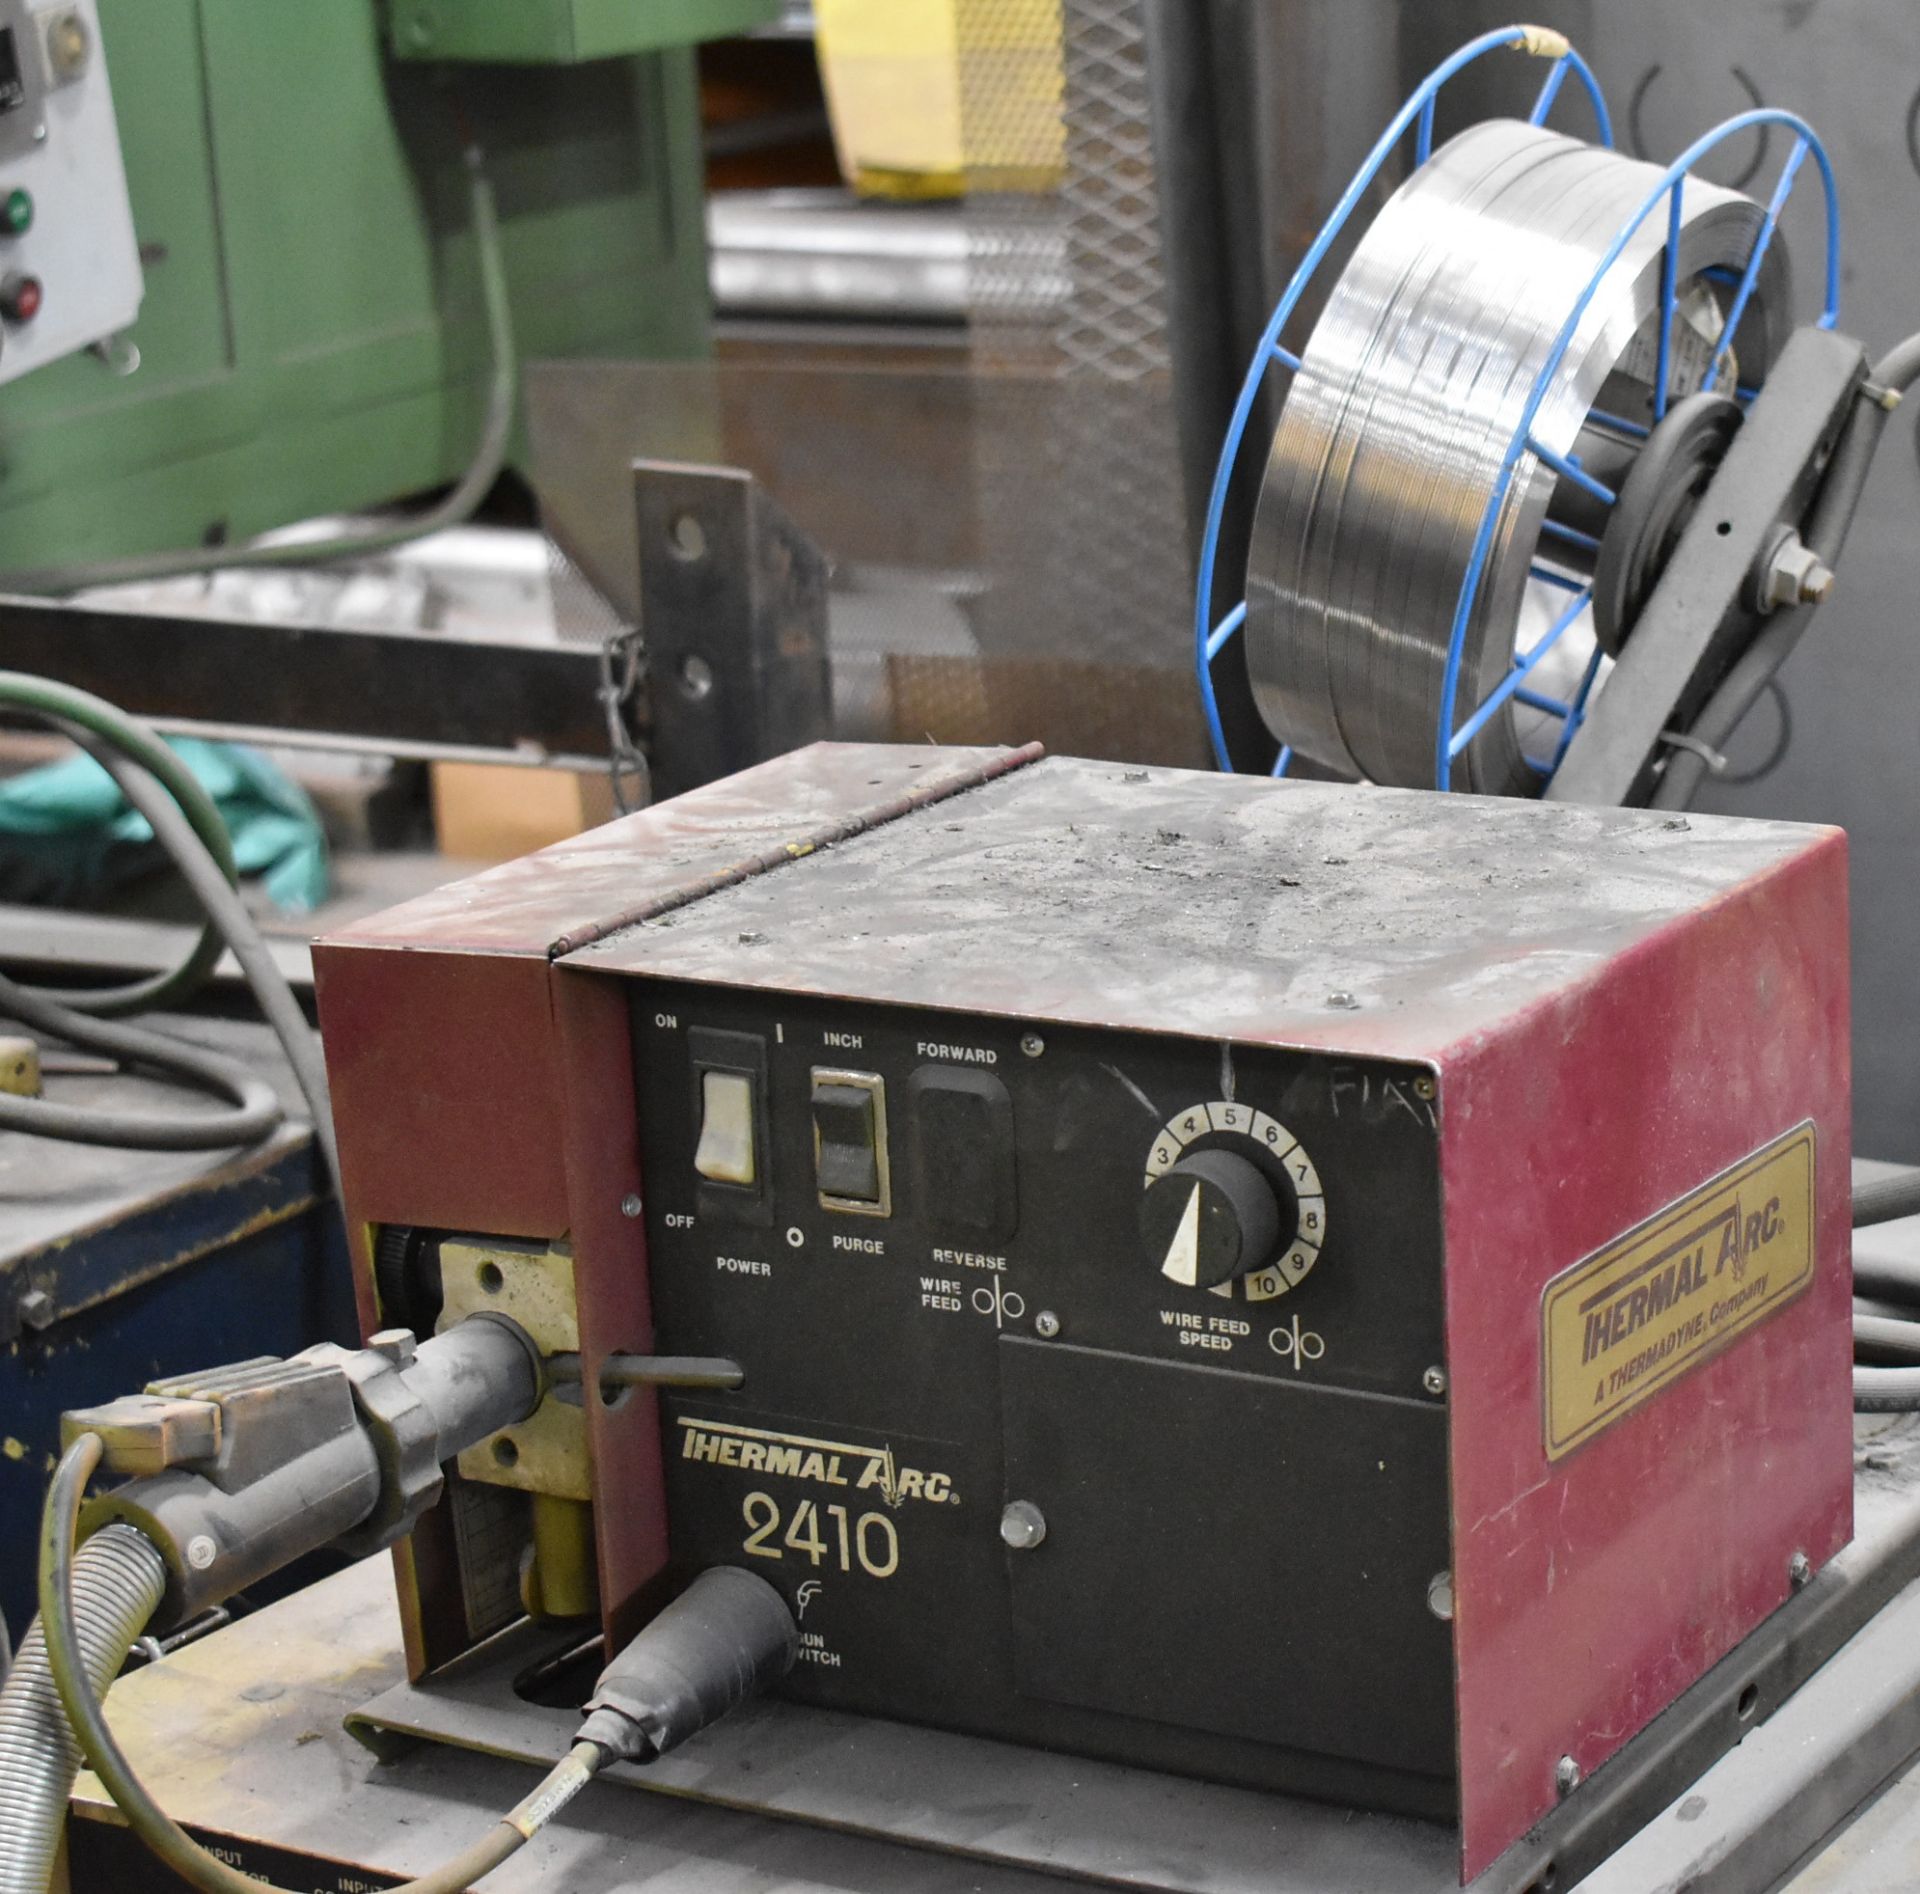 HOBART MEGA-FLEX 450-RVS MIG WELDER WITH THERMAL ARC 2410 WIRE FEEDER, CABLES & GUN, S/N: N/A - Image 2 of 3